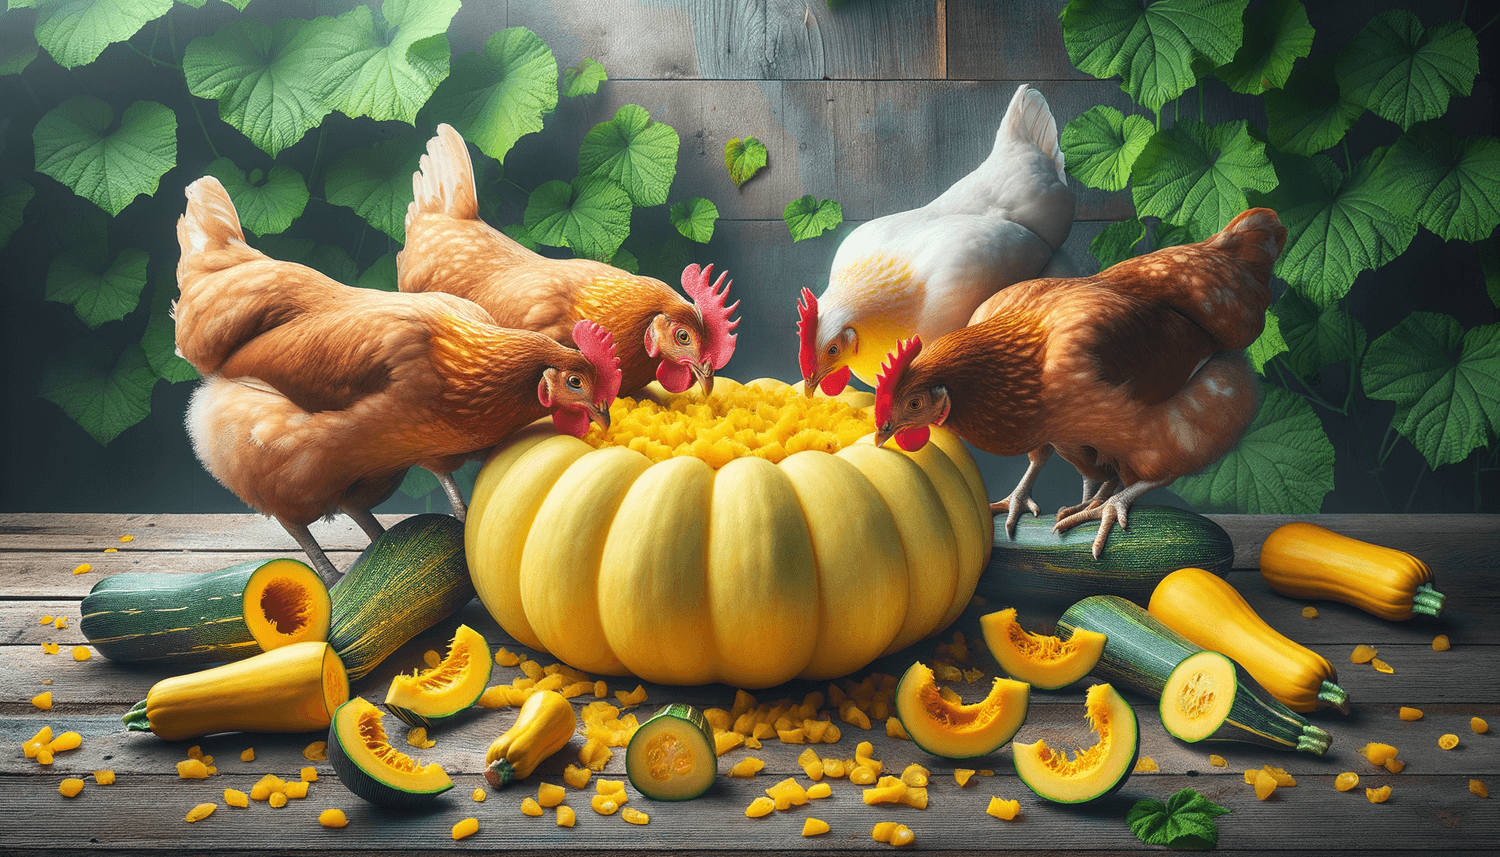 Can Chickens Eat Raw Yellow Squash?